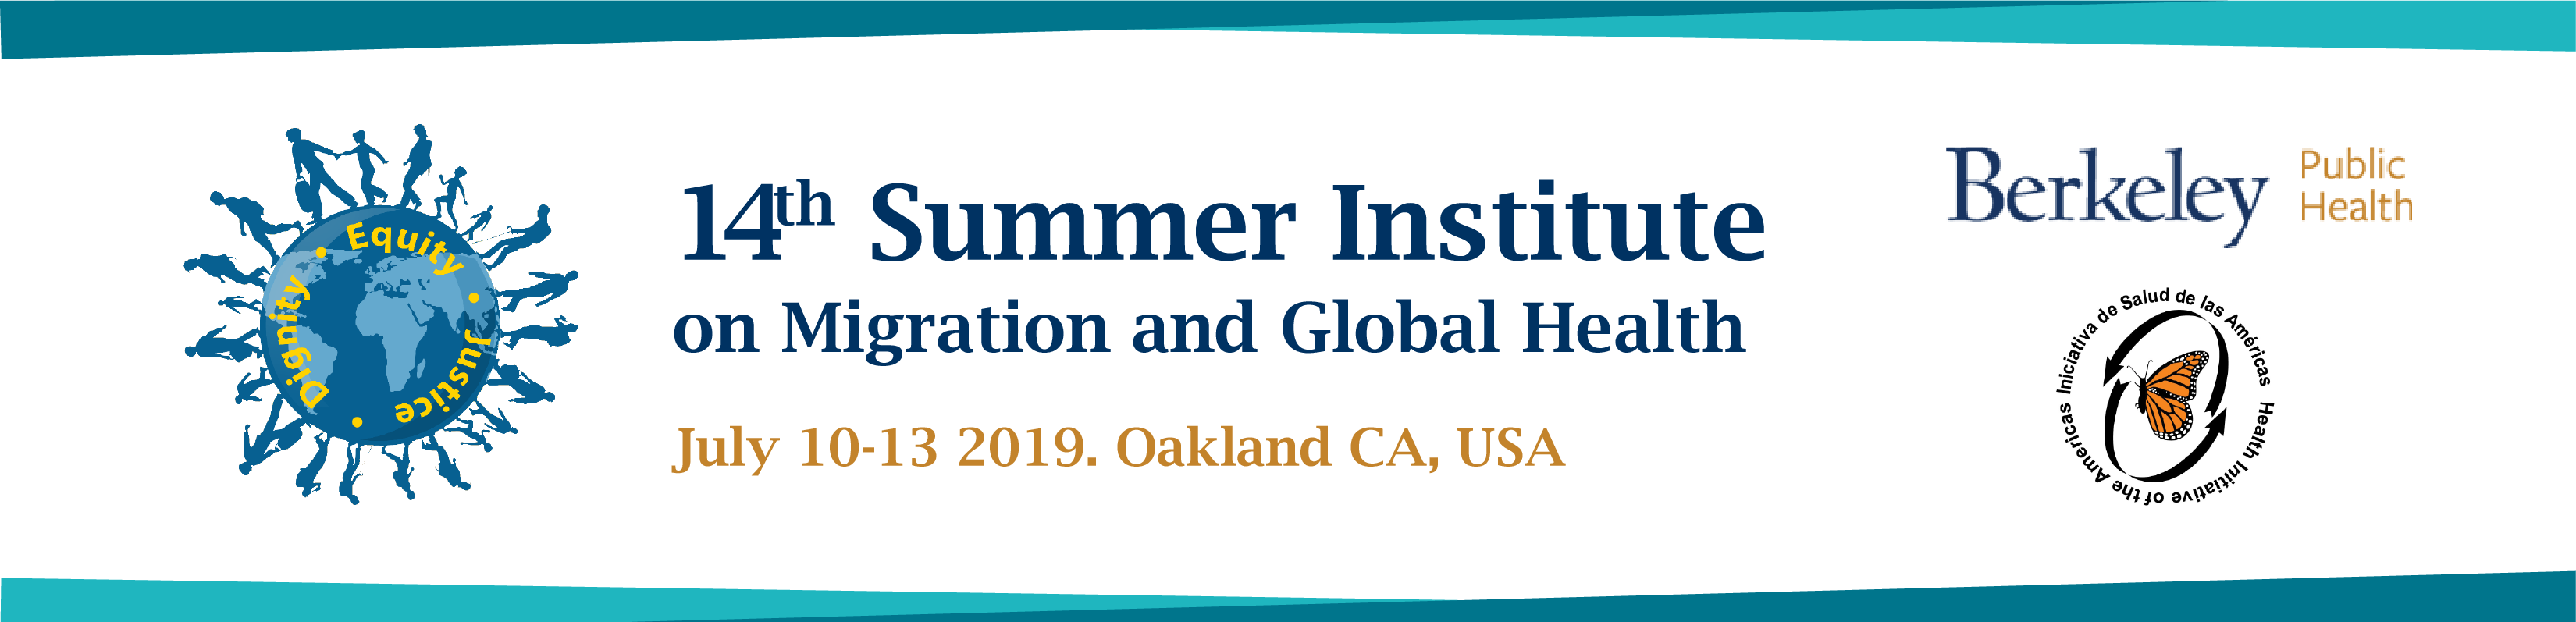 14th Summer Institute on Migration and Global Health